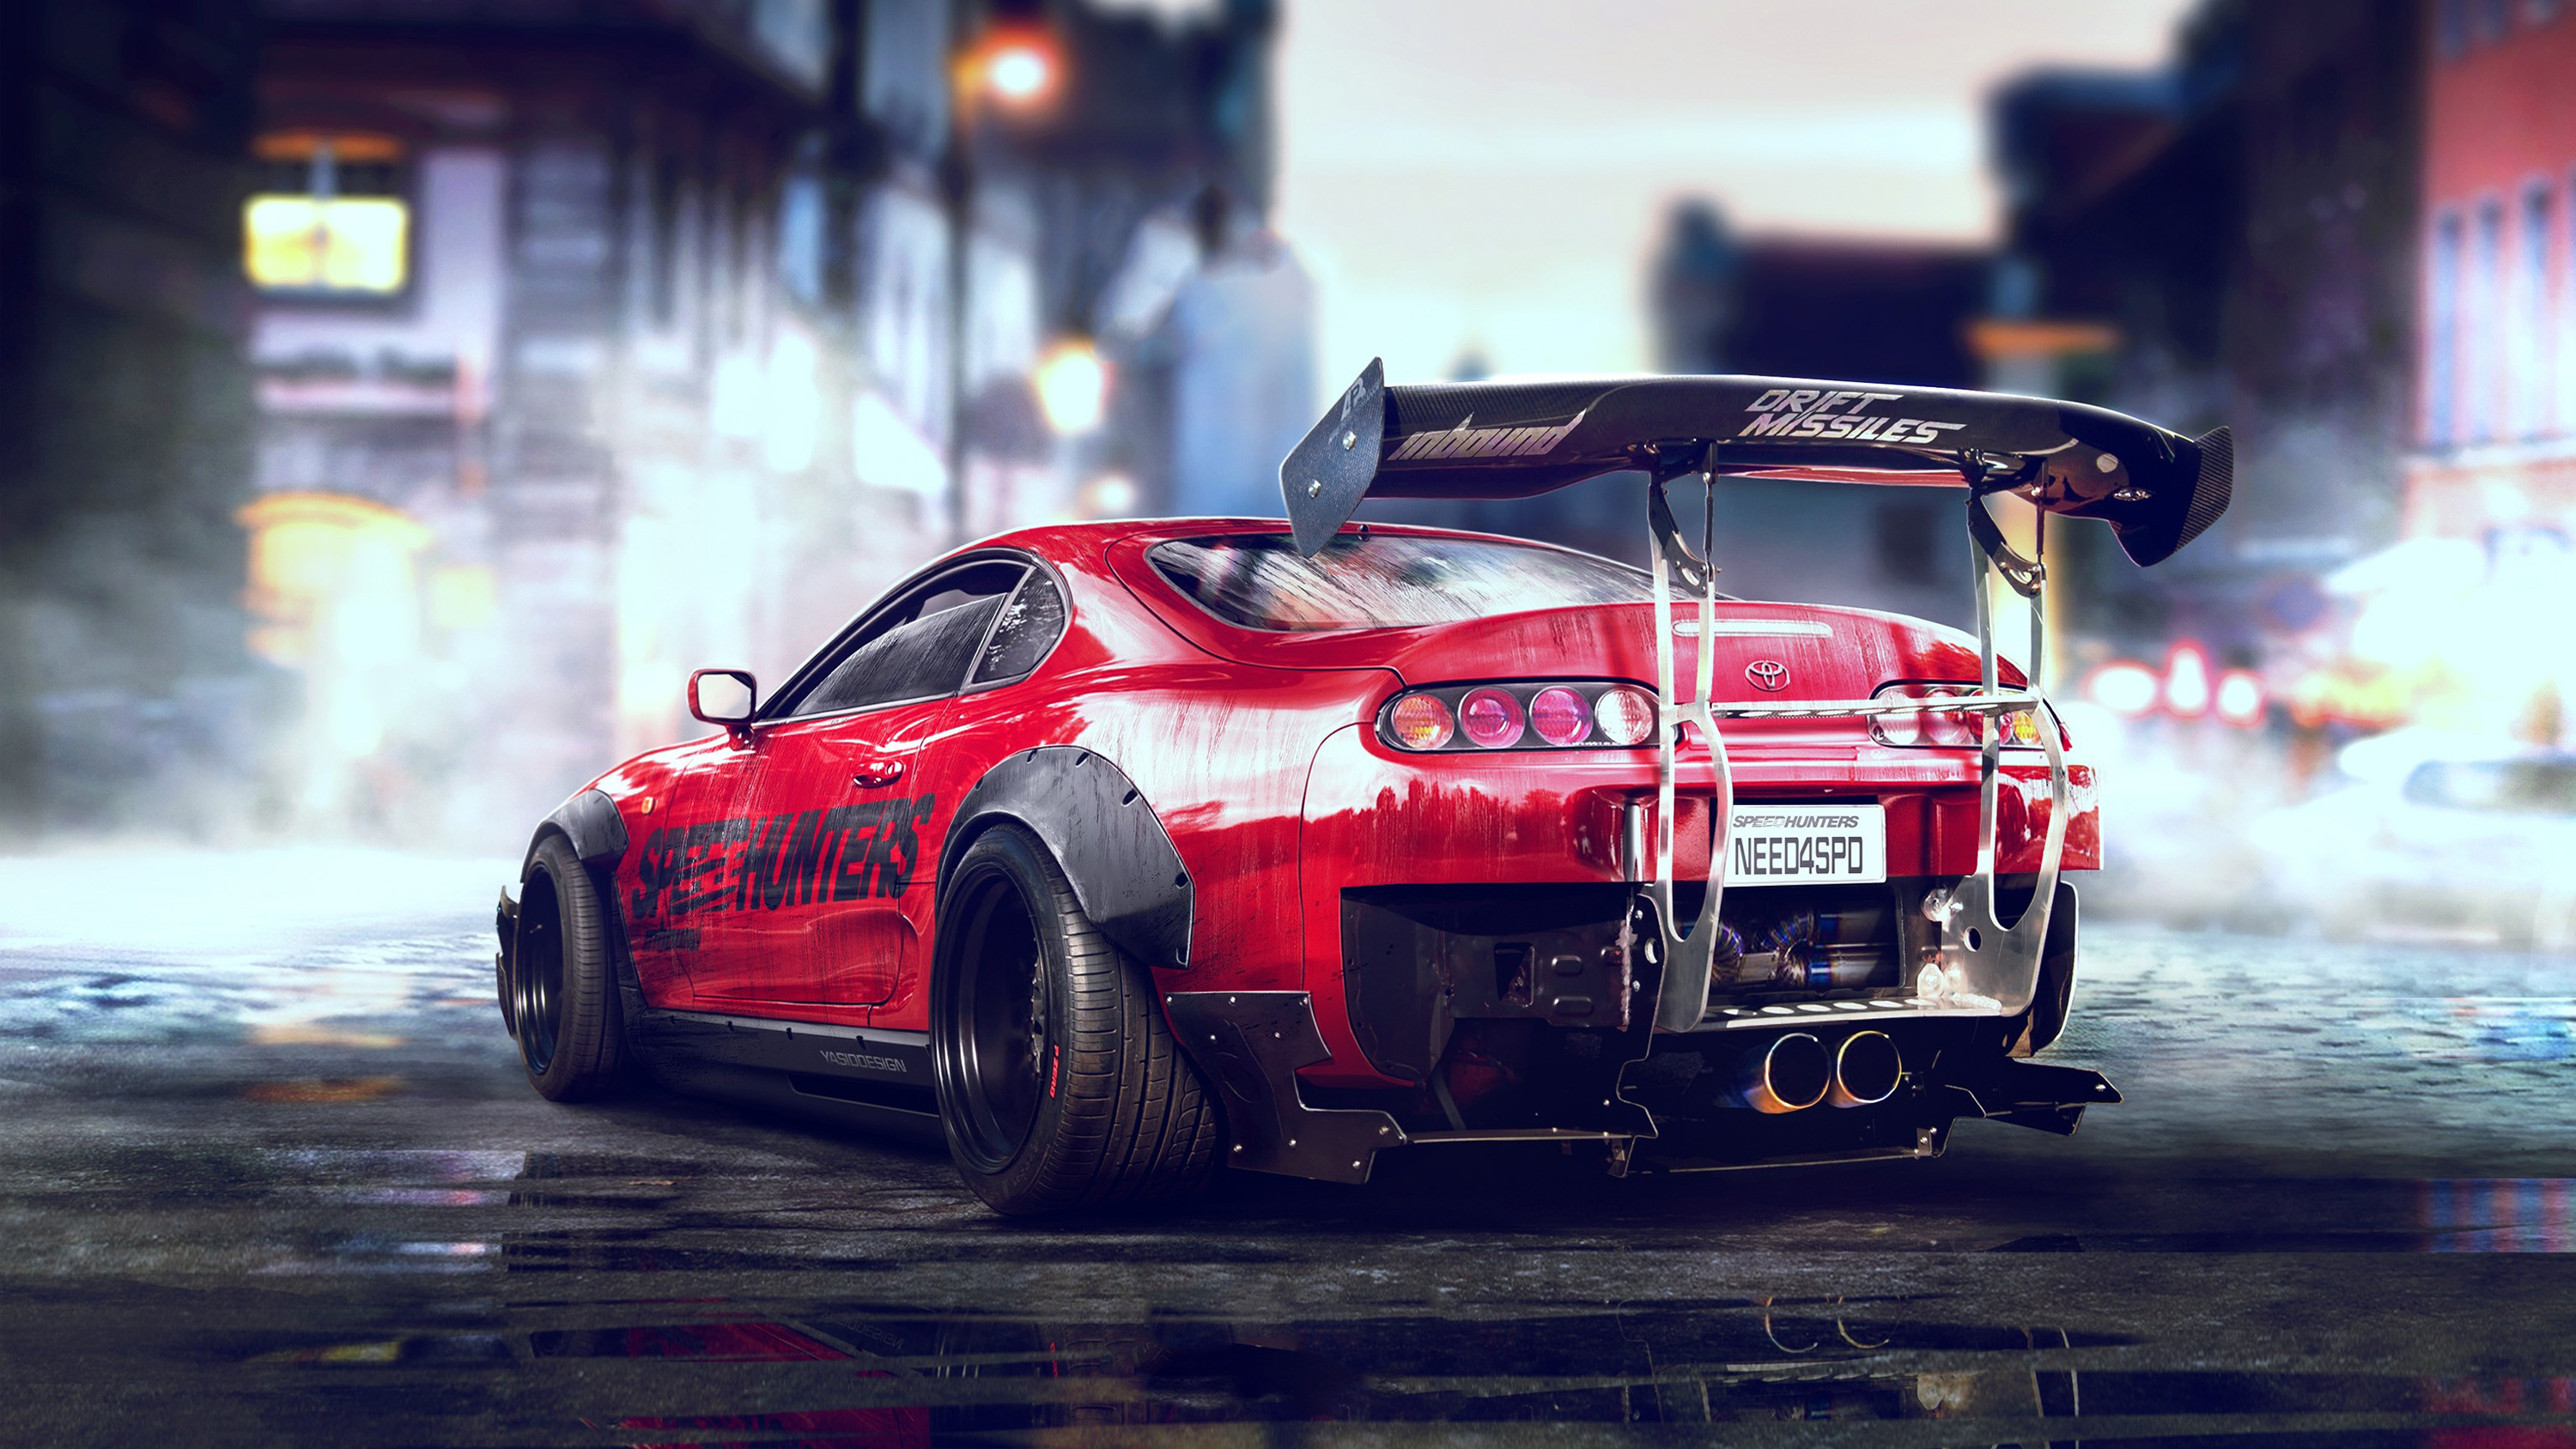 Toyota Supra Need For Speed Wallpaper Hd Car Wallpapers Id 7779